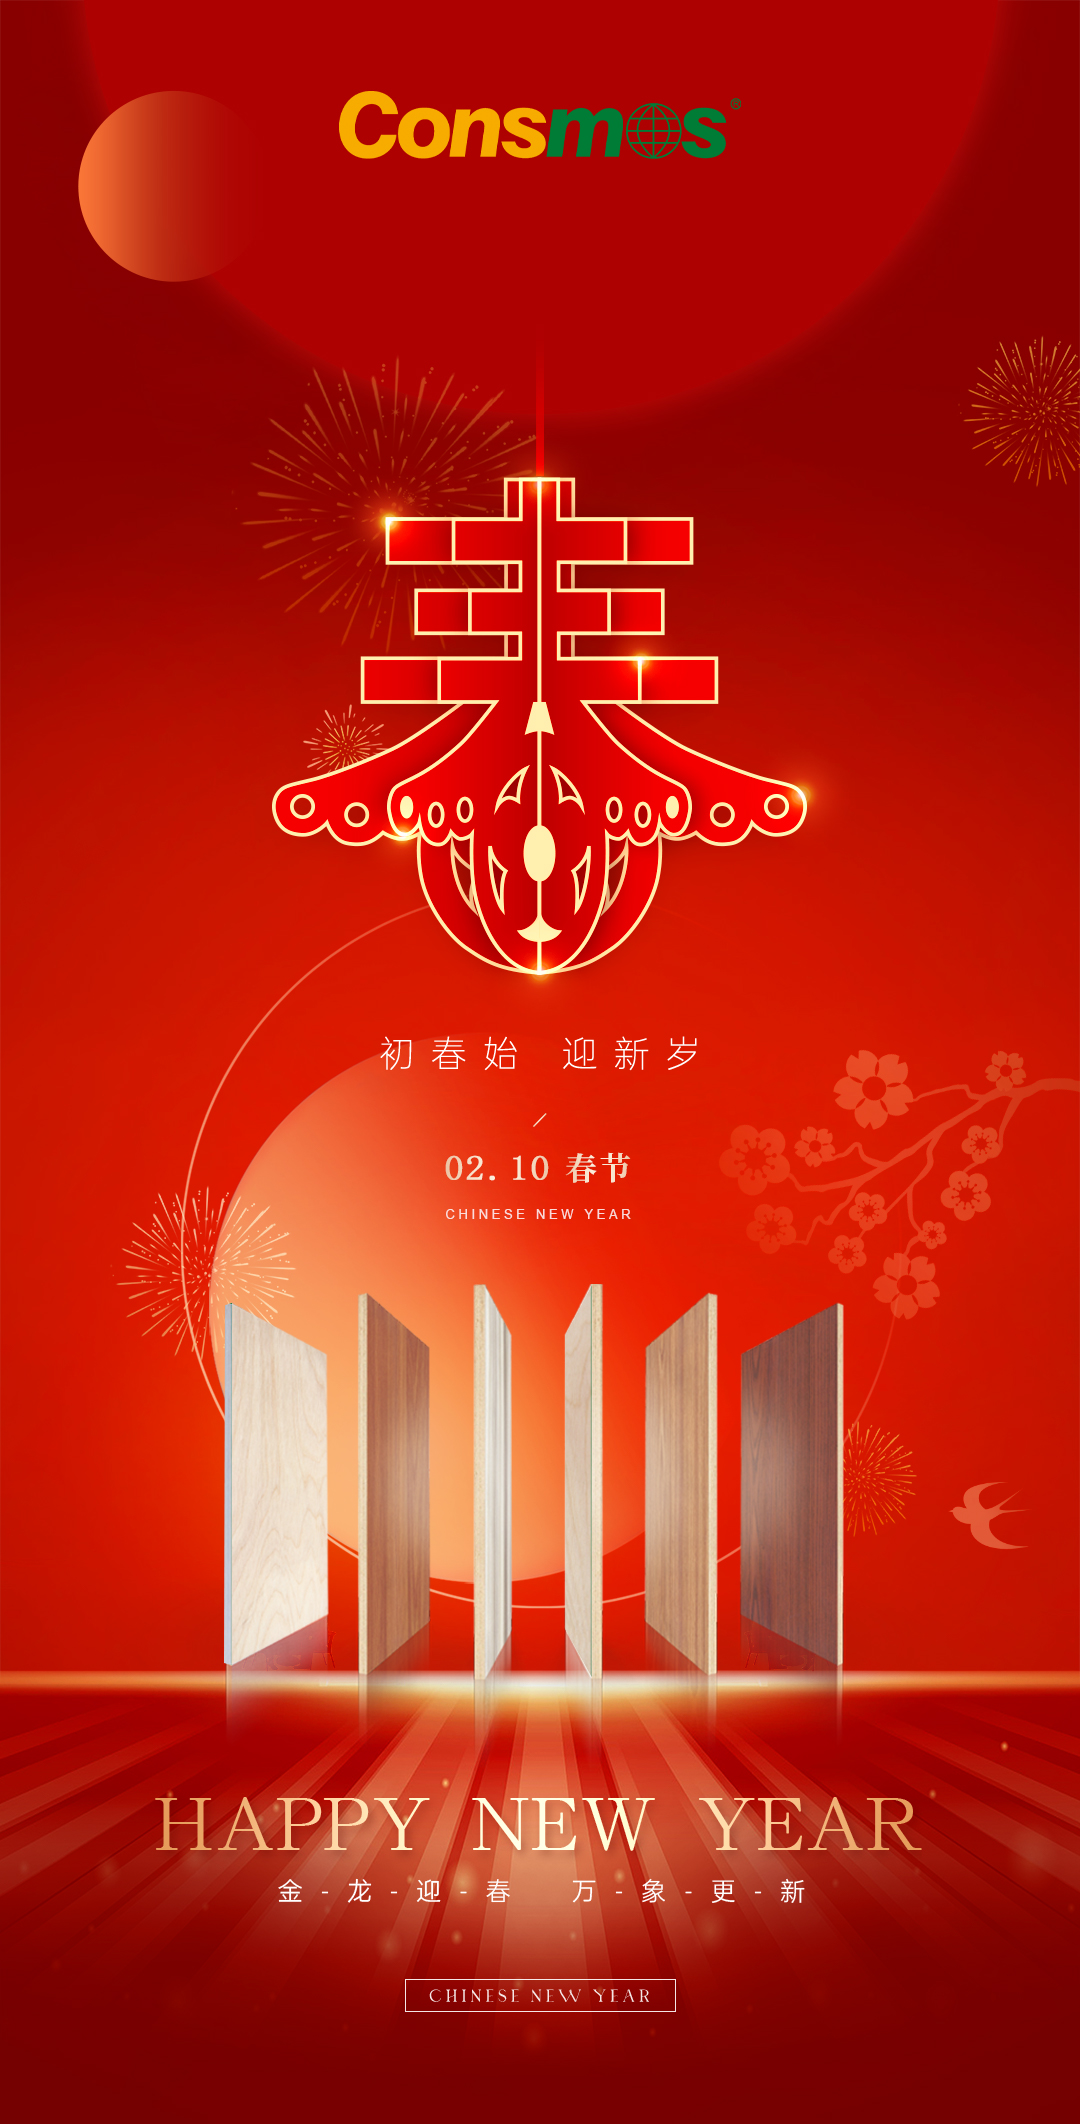 CONSMOS Group Wishes Its Global Partners A Happy Chinese New Year